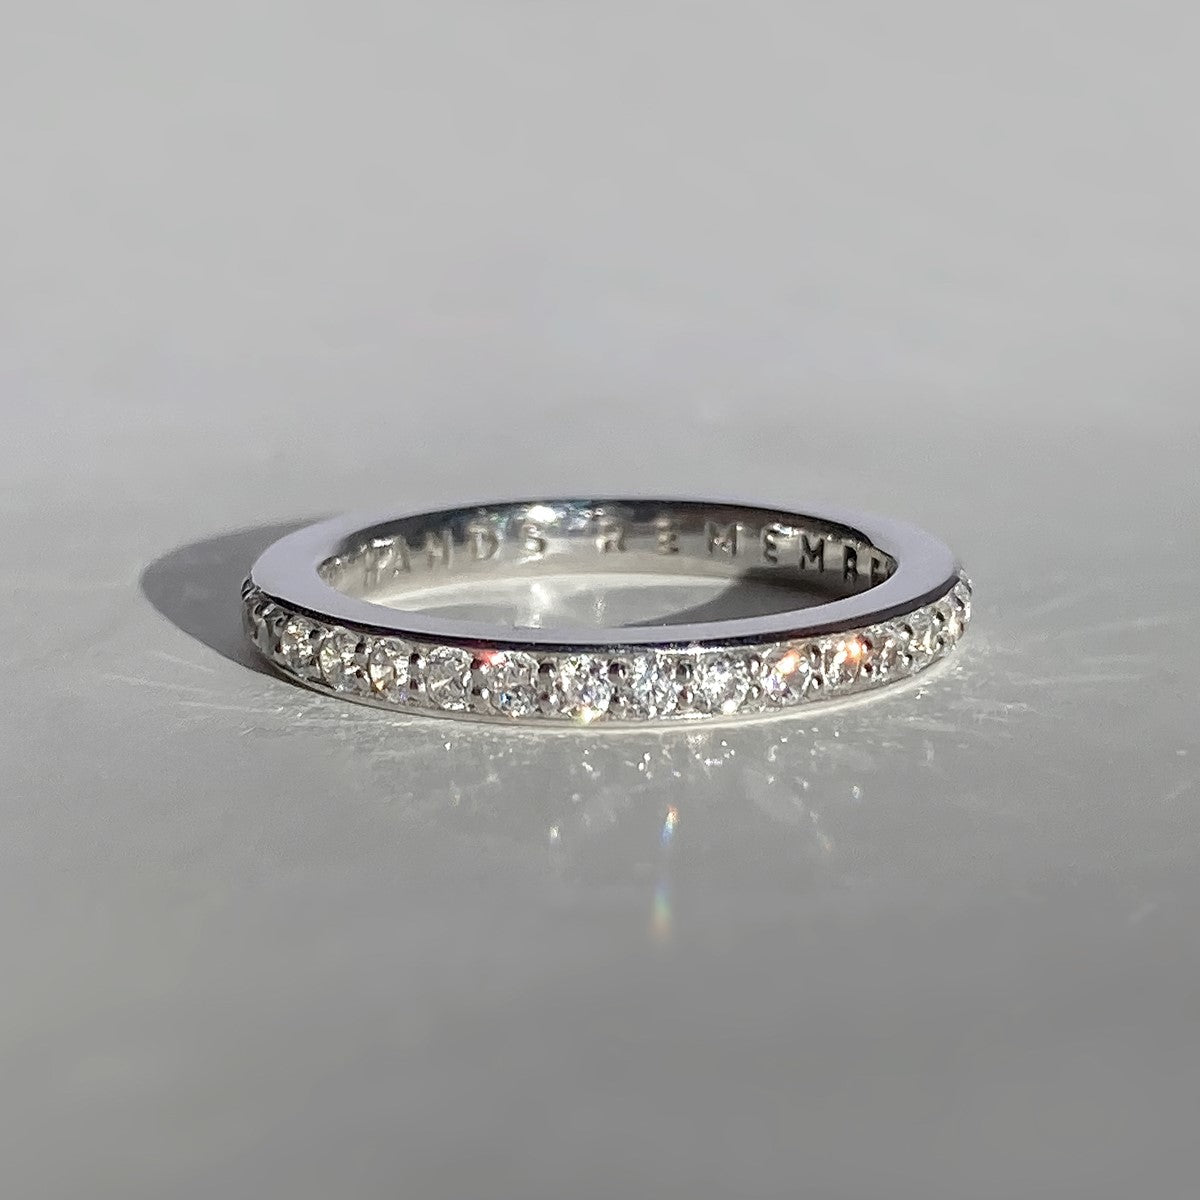 RING "MEMORIES" WITH A FULL CIRCLE OF MOISSANITE | SILVER